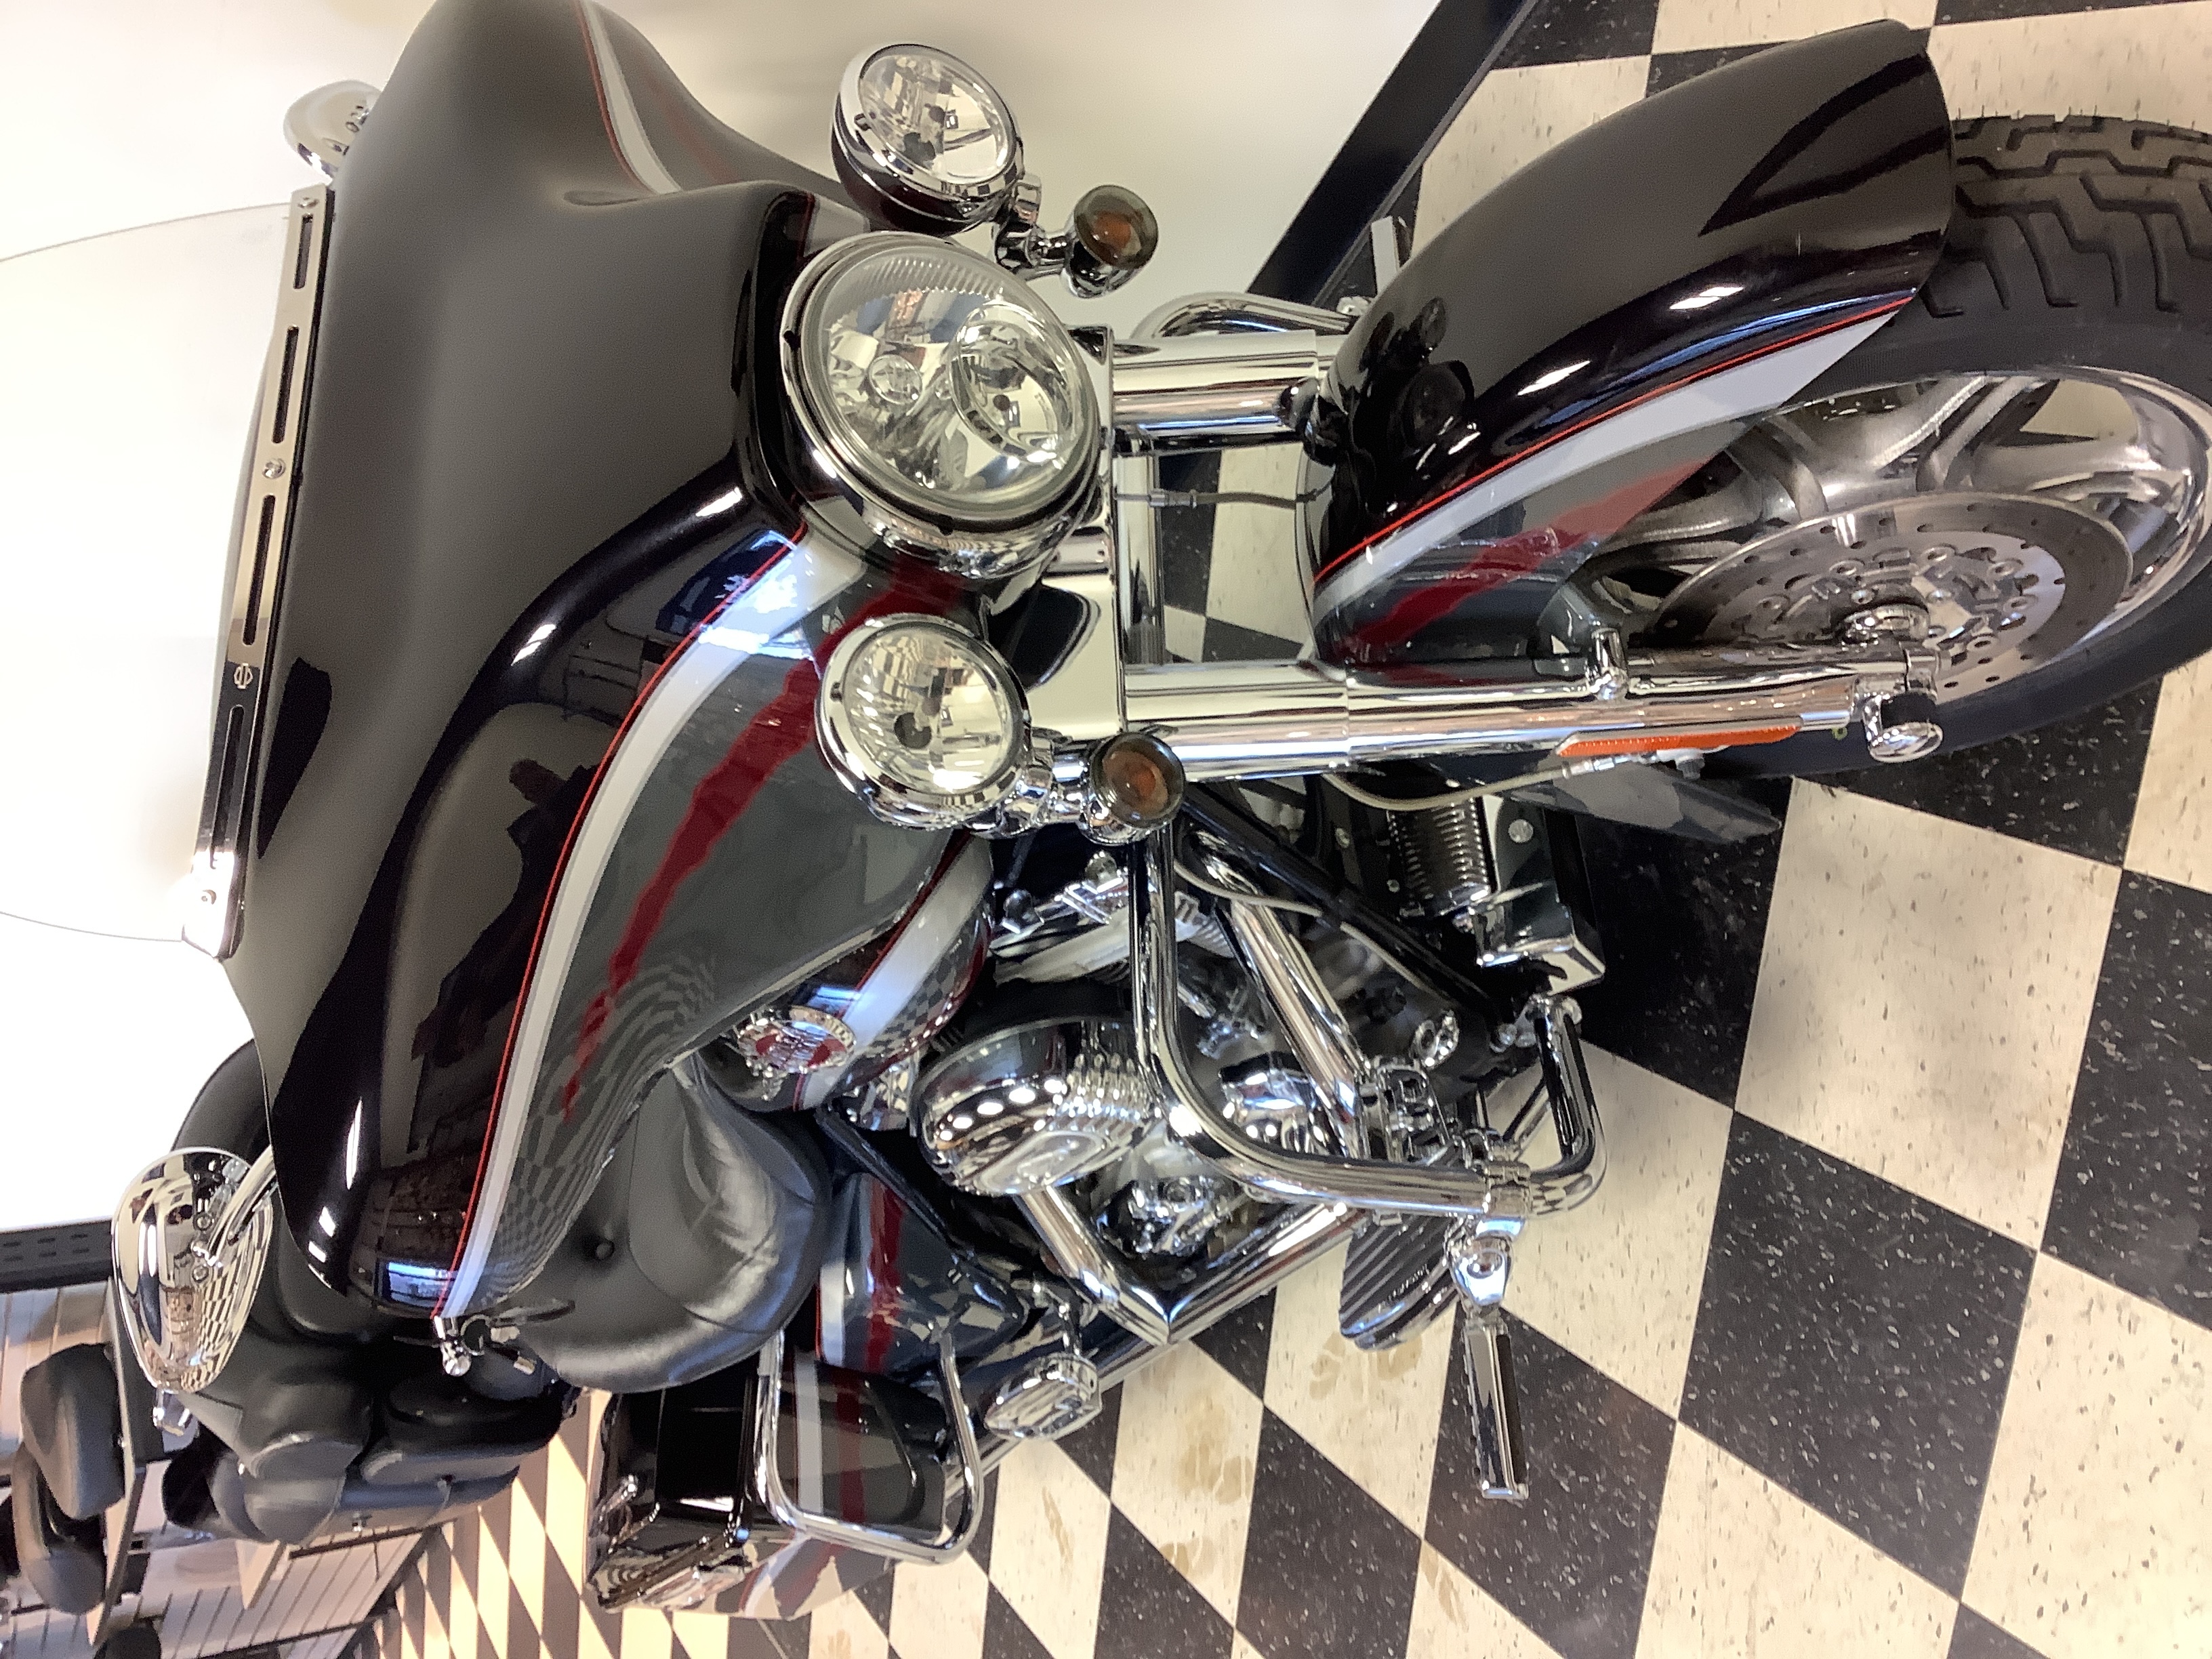 2006 Harley-Davidson Electra Glide Ultra Classic at Deluxe Harley Davidson